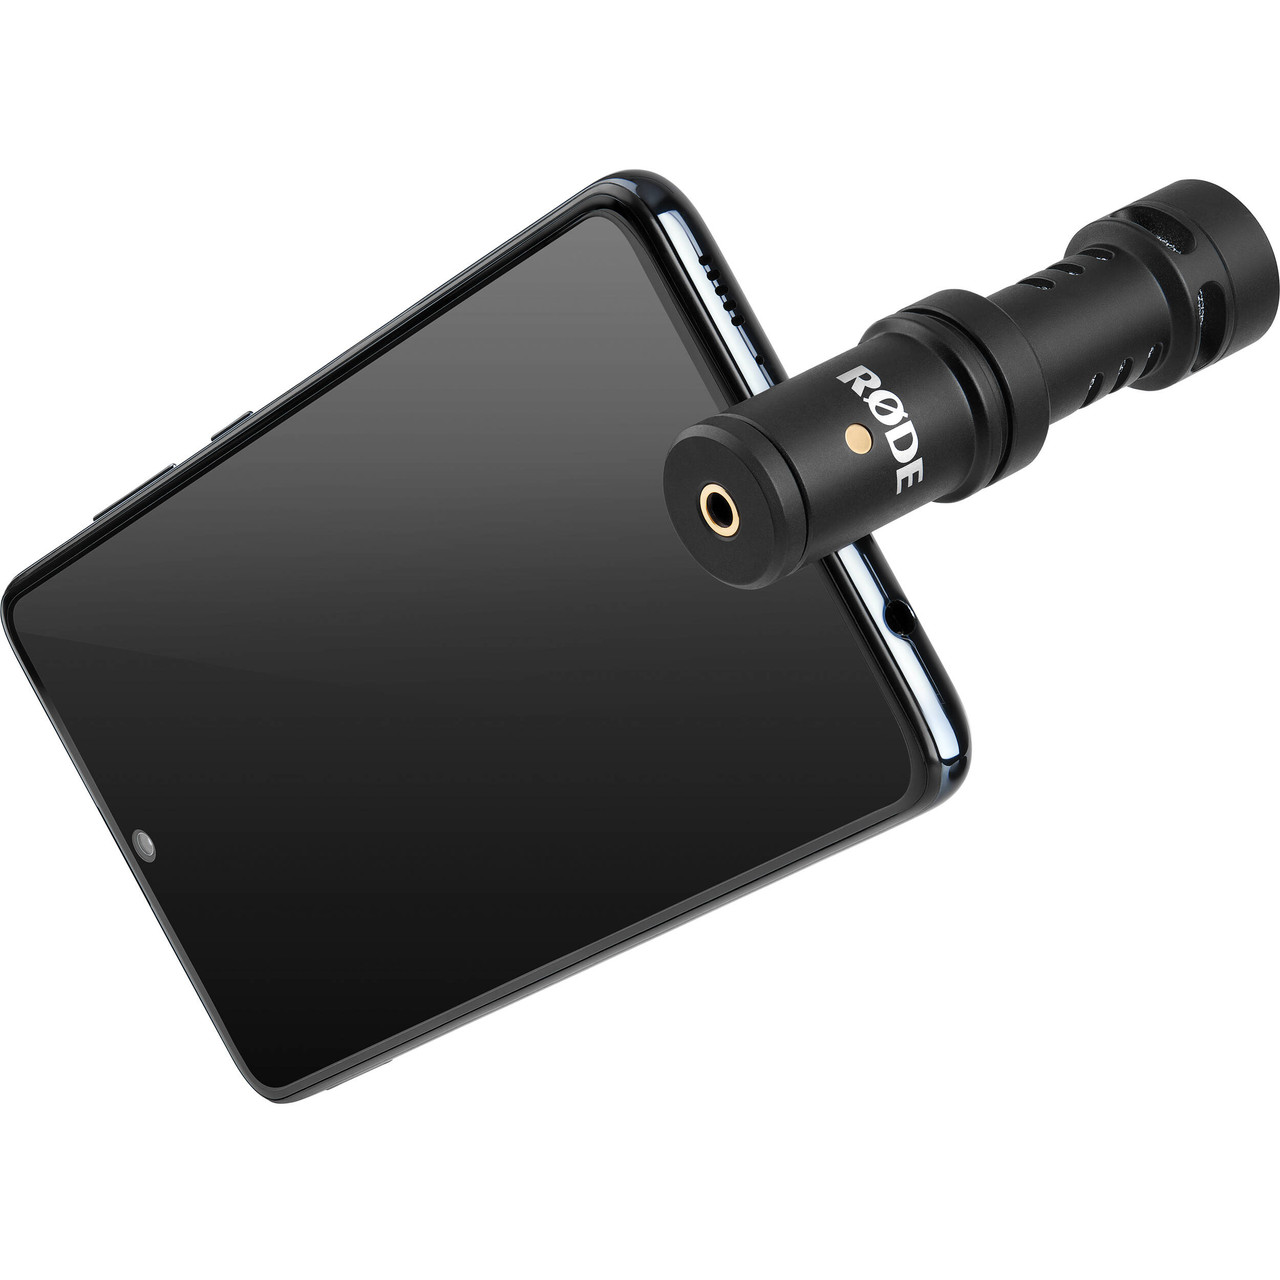 Rode Videomic NTG - Best smartphone directional microphone for iPhone &  Android video.